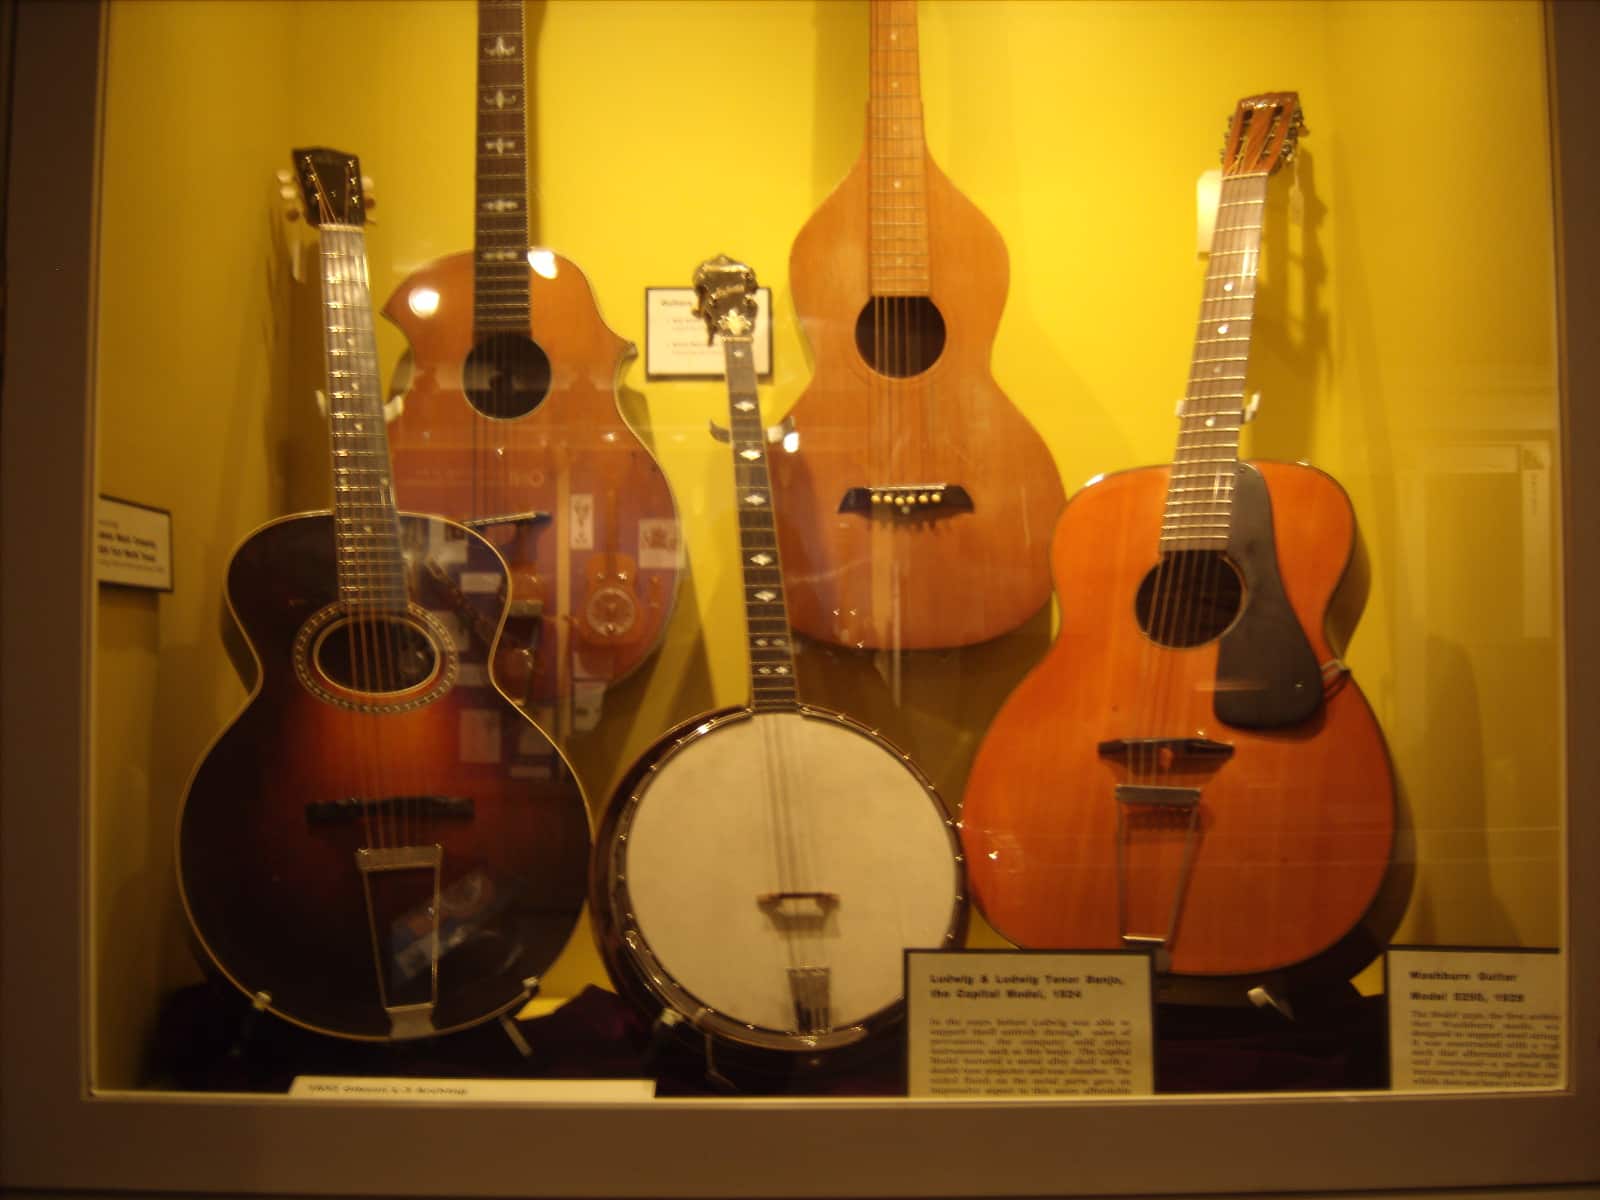 San Diego Museum Month - visit the Museum of Making Music in Carlsbad